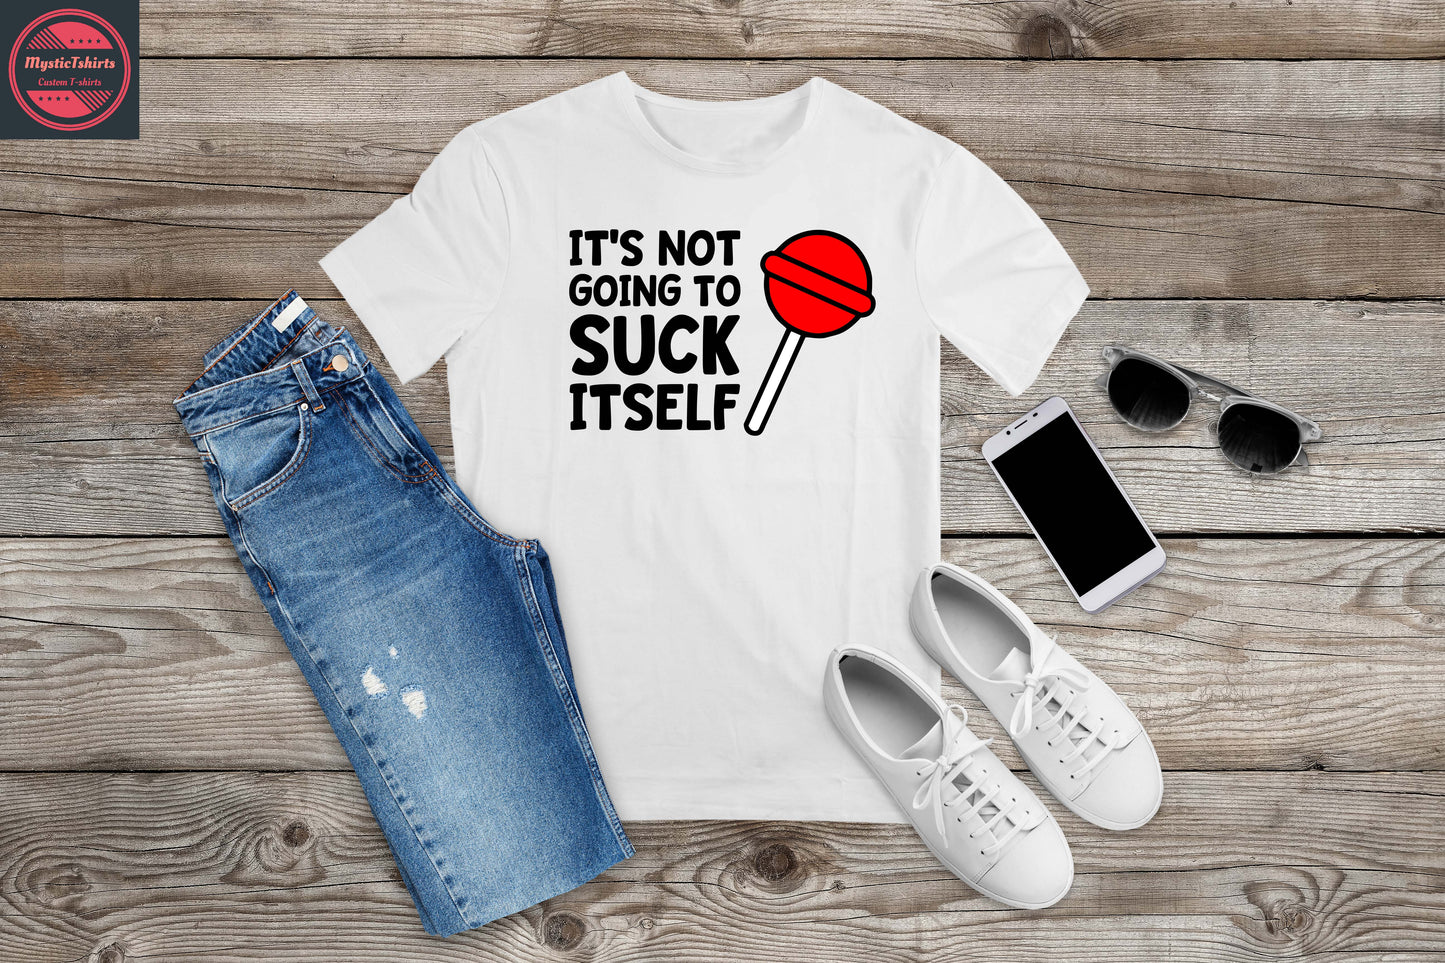 257. IT'S NOT GOING TO SUCK ITSELF, Personalized T-Shirt, Custom Text, Make Your Own Shirt, Custom Tee